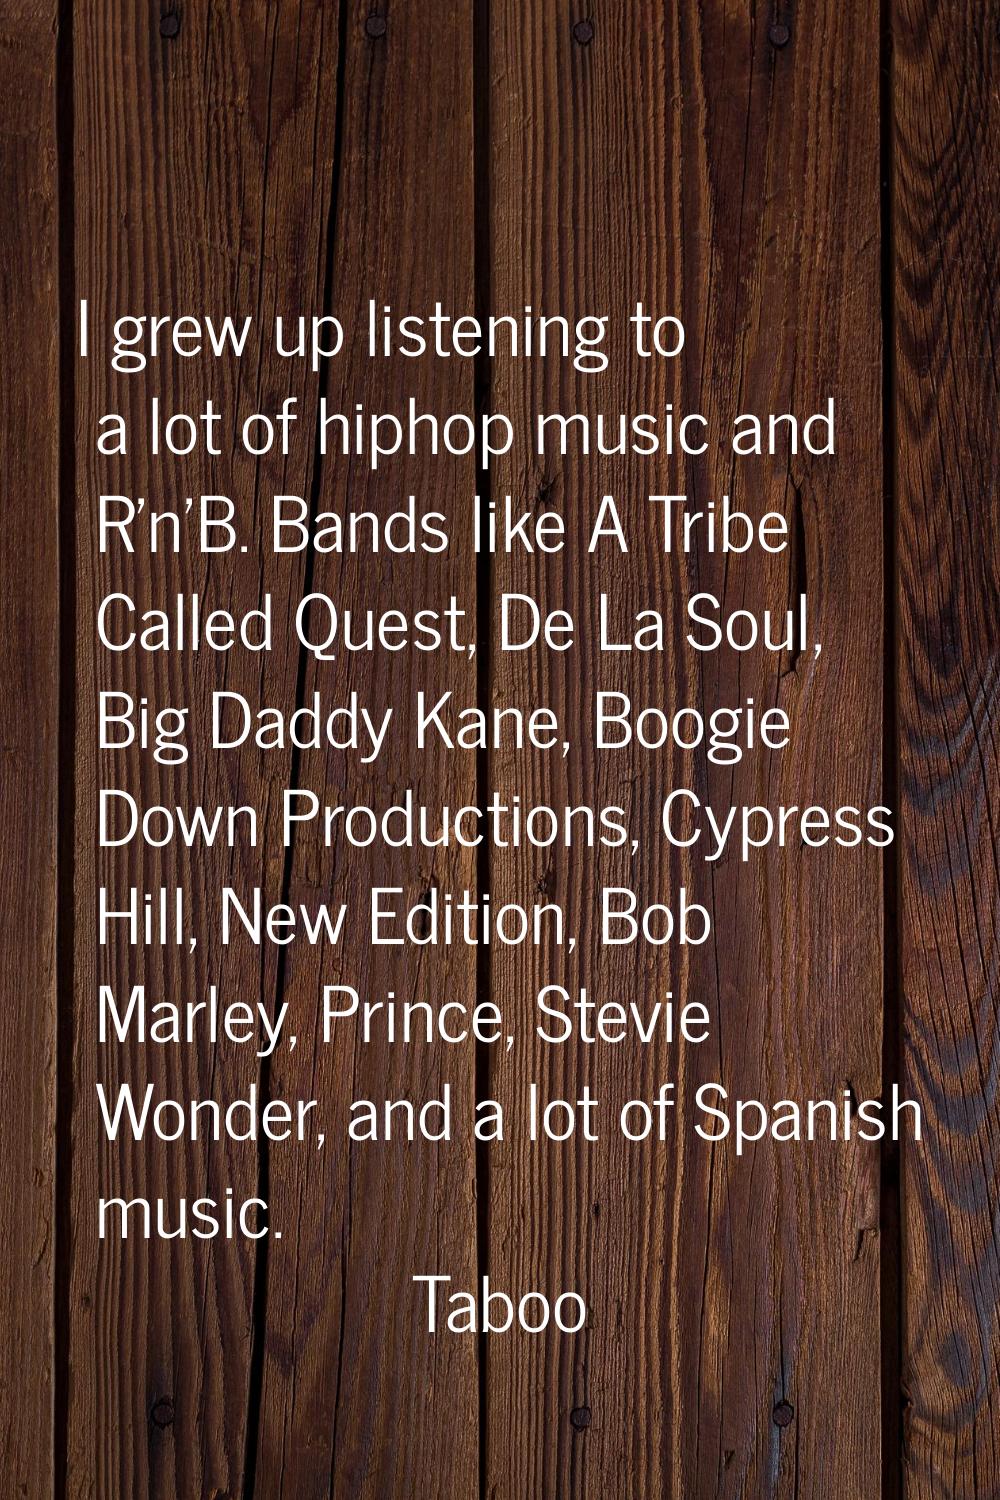 I grew up listening to a lot of hiphop music and R'n'B. Bands like A Tribe Called Quest, De La Soul